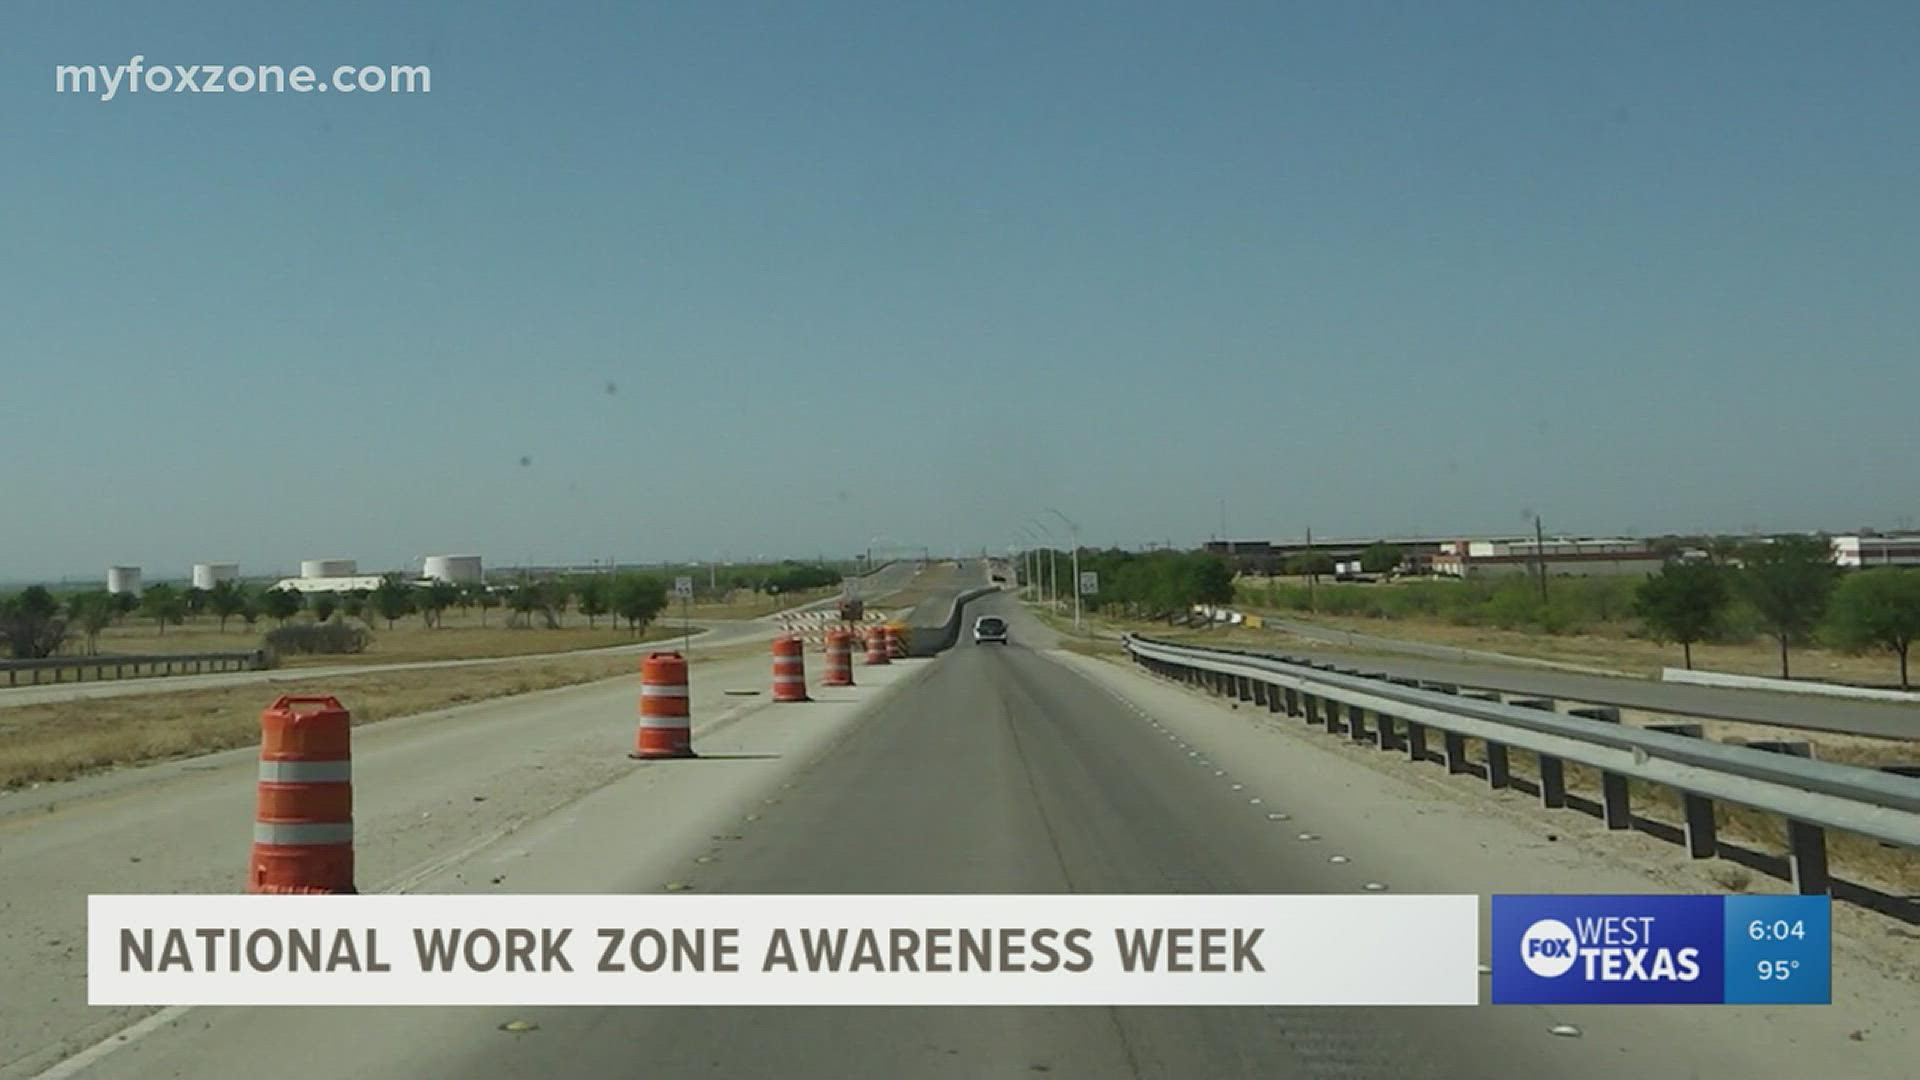 With a rise in crashes in work zones in Texas, TxDOT launches a campaign in an effort to raise awareness for drivers.